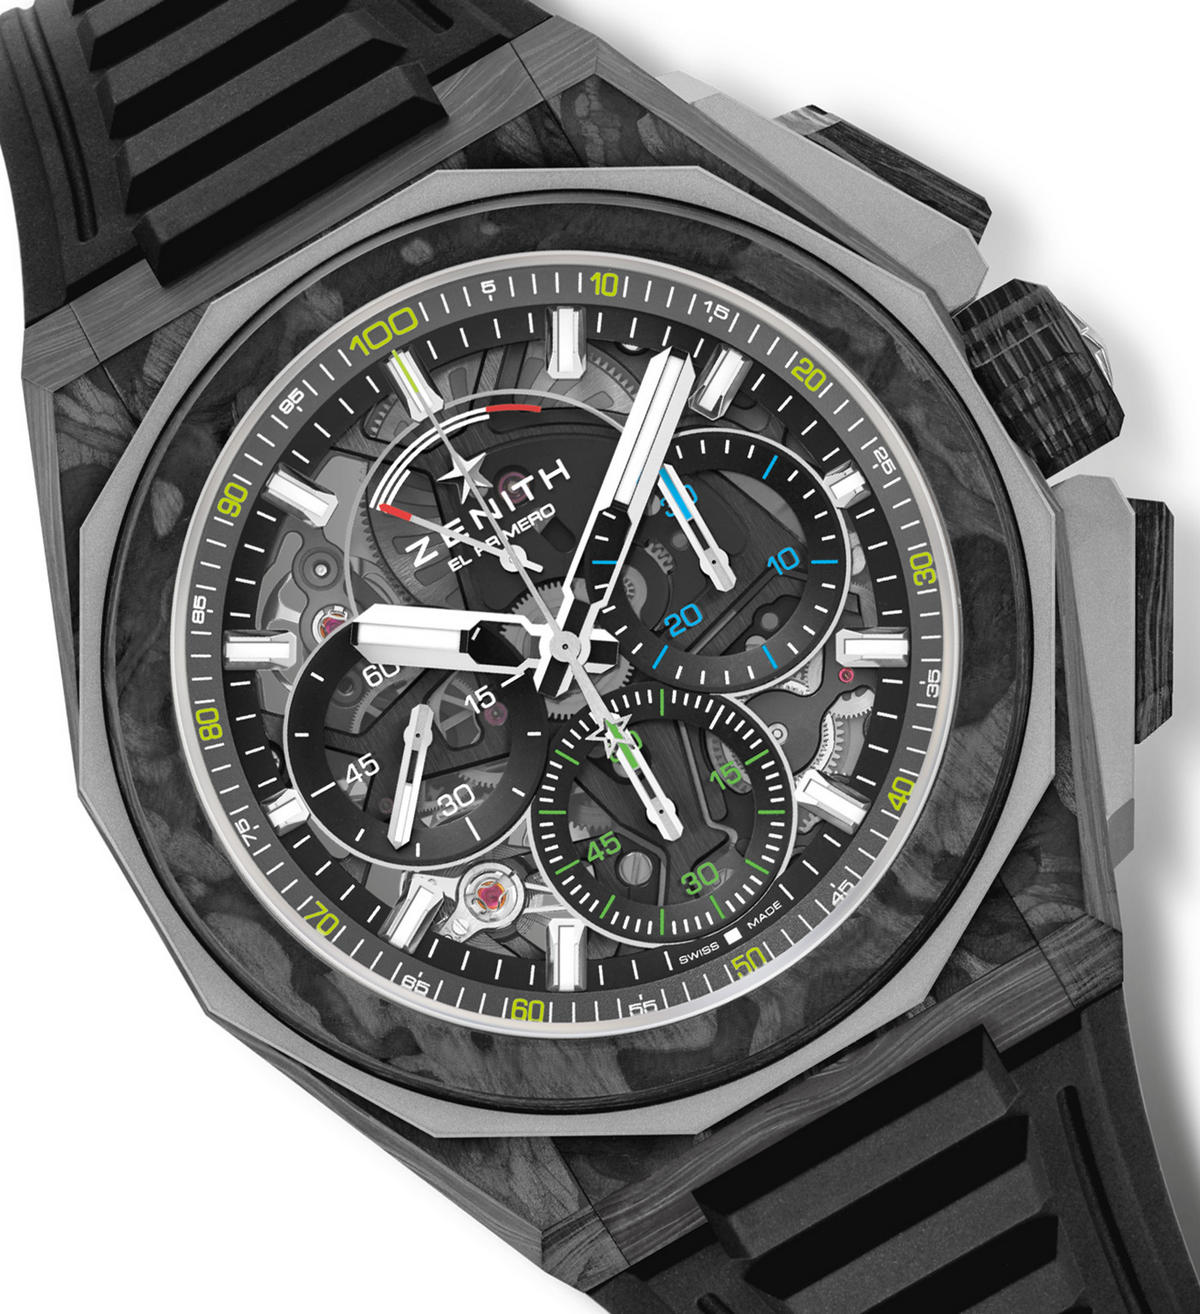 Zenith's New Defy Extreme E Is Made Entirely of Carbon Fiber – Robb Report